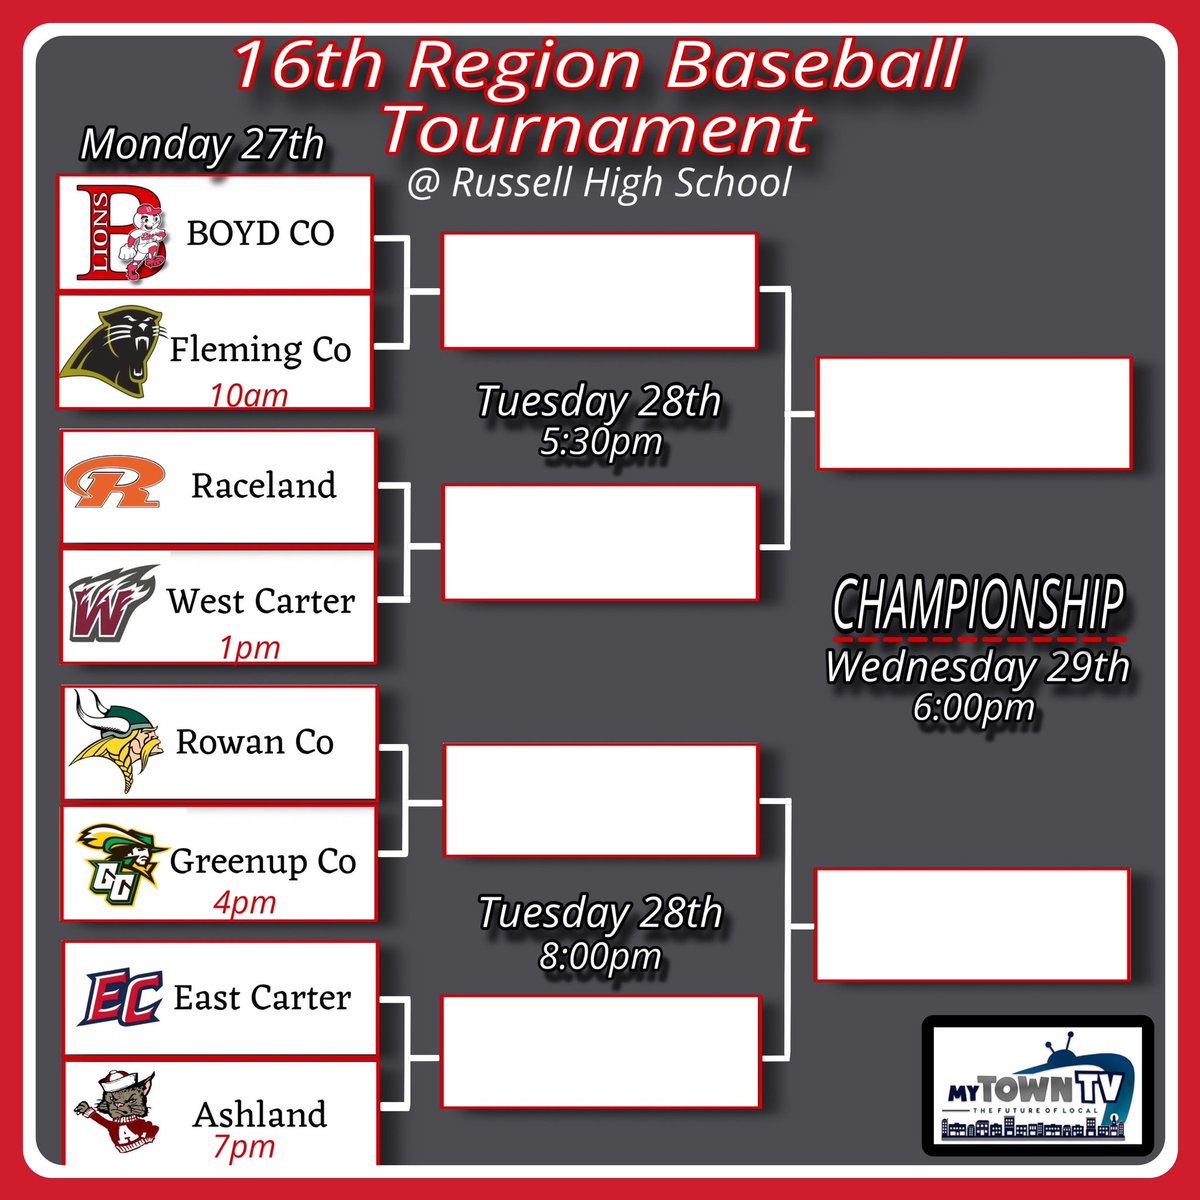 The stage has been set and it all kicks off for the #CountyBoys Monday morning at 10am against Fleming Co. Come out and support your Lions in the 16th Region Tournament at Russell High School. Should be a day full of great and exciting baseball!